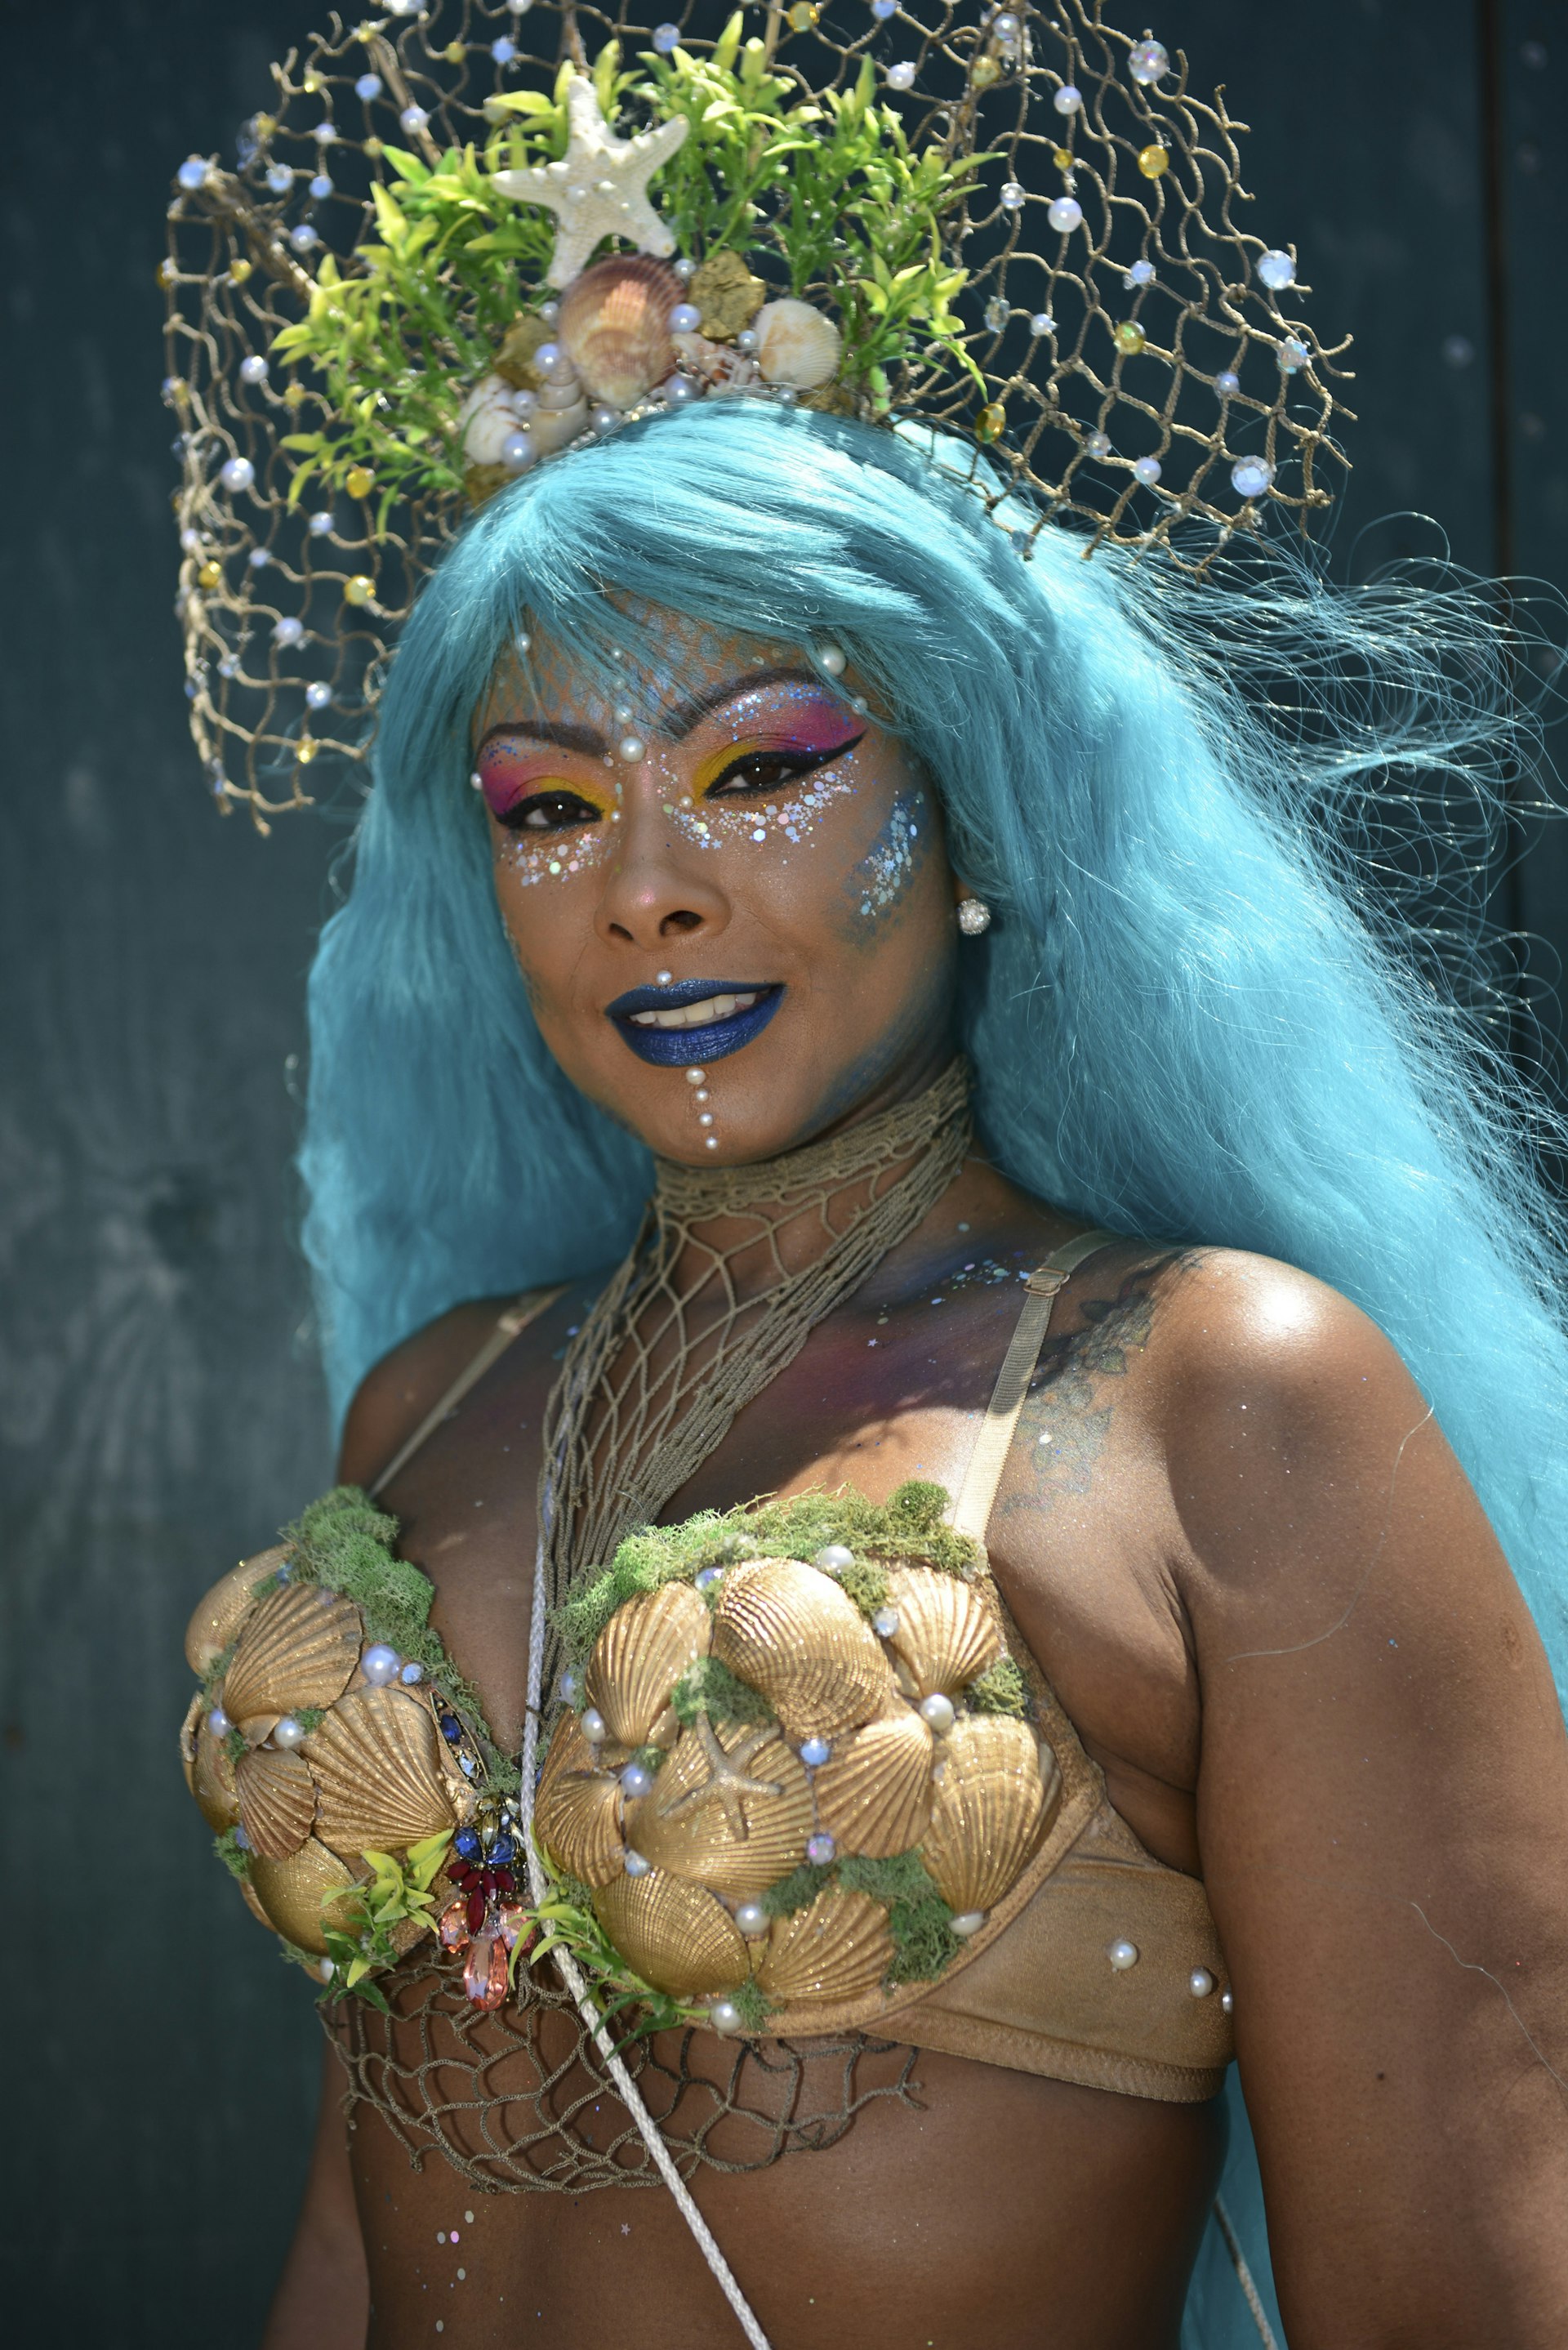 A person with an aqua-colored wig wears a golden crown filled with sea shells, a starfish and golden netting dotted with pearls. The person is wearing a bikini top made of sea shells that have been painted gold.